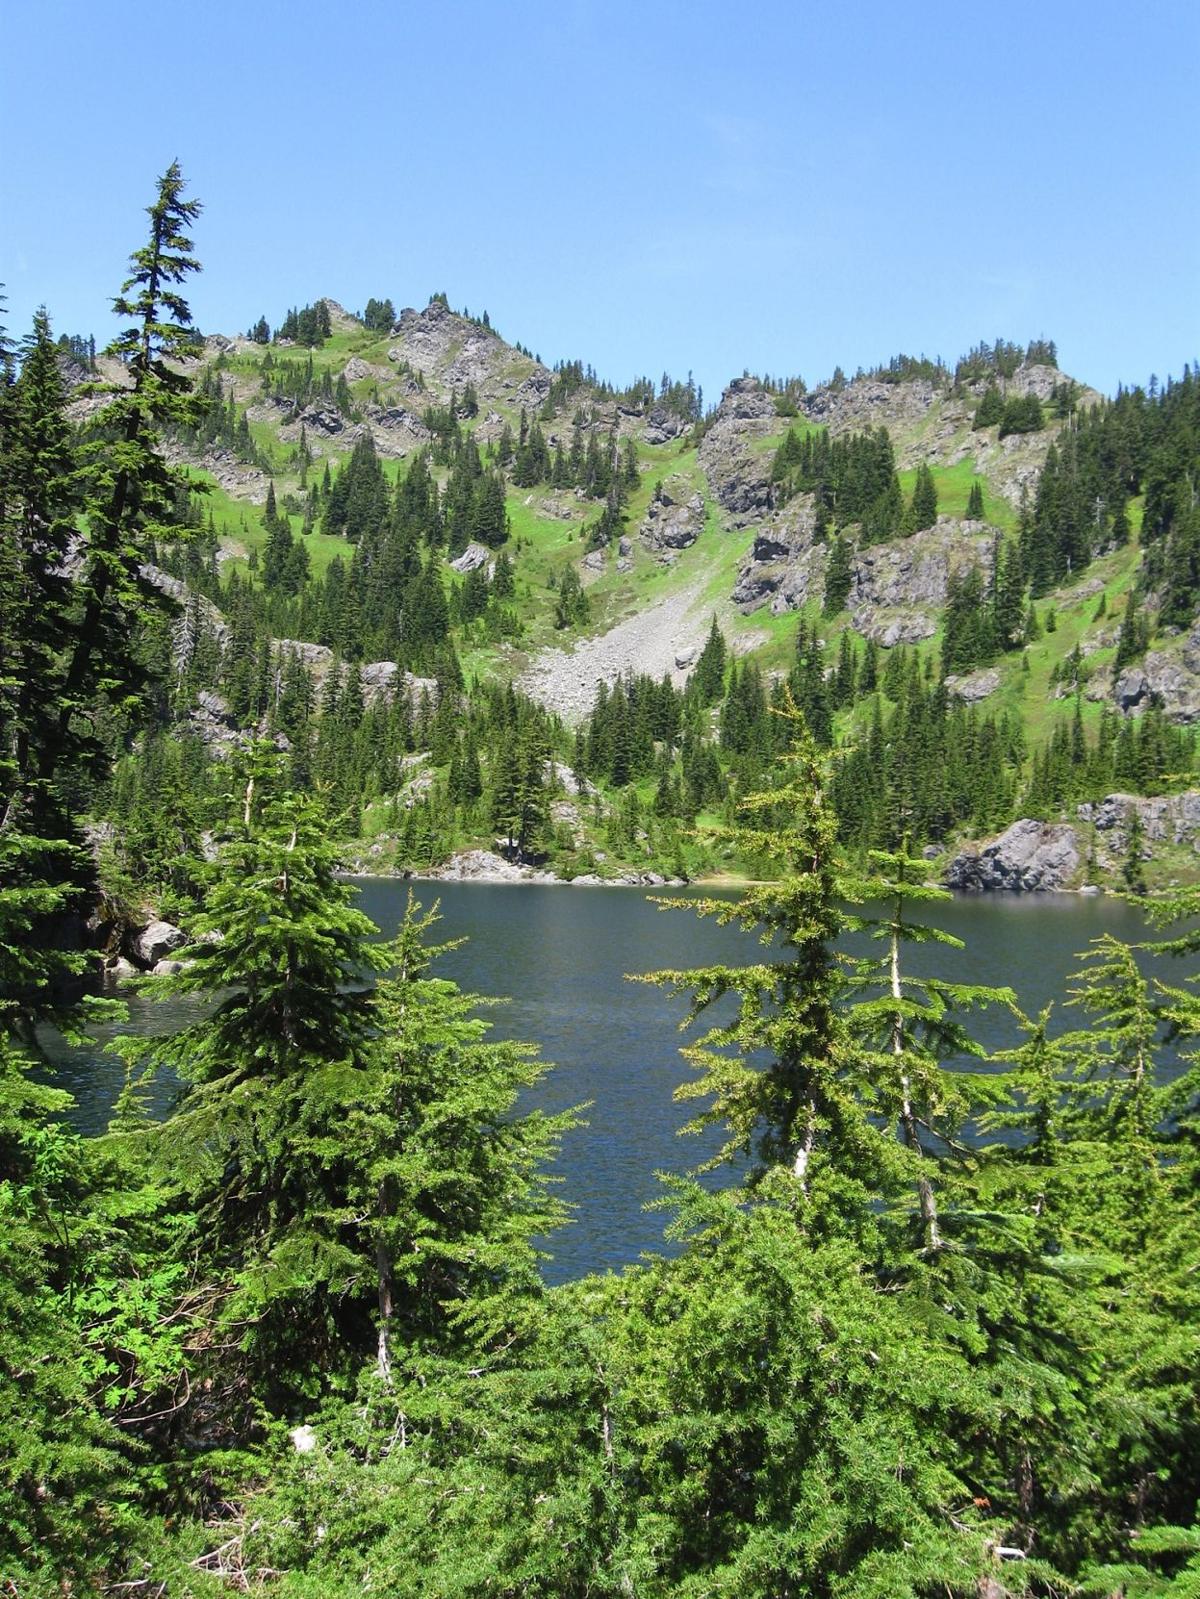 Lake Lillian offers hike for the more experienced Outdoors